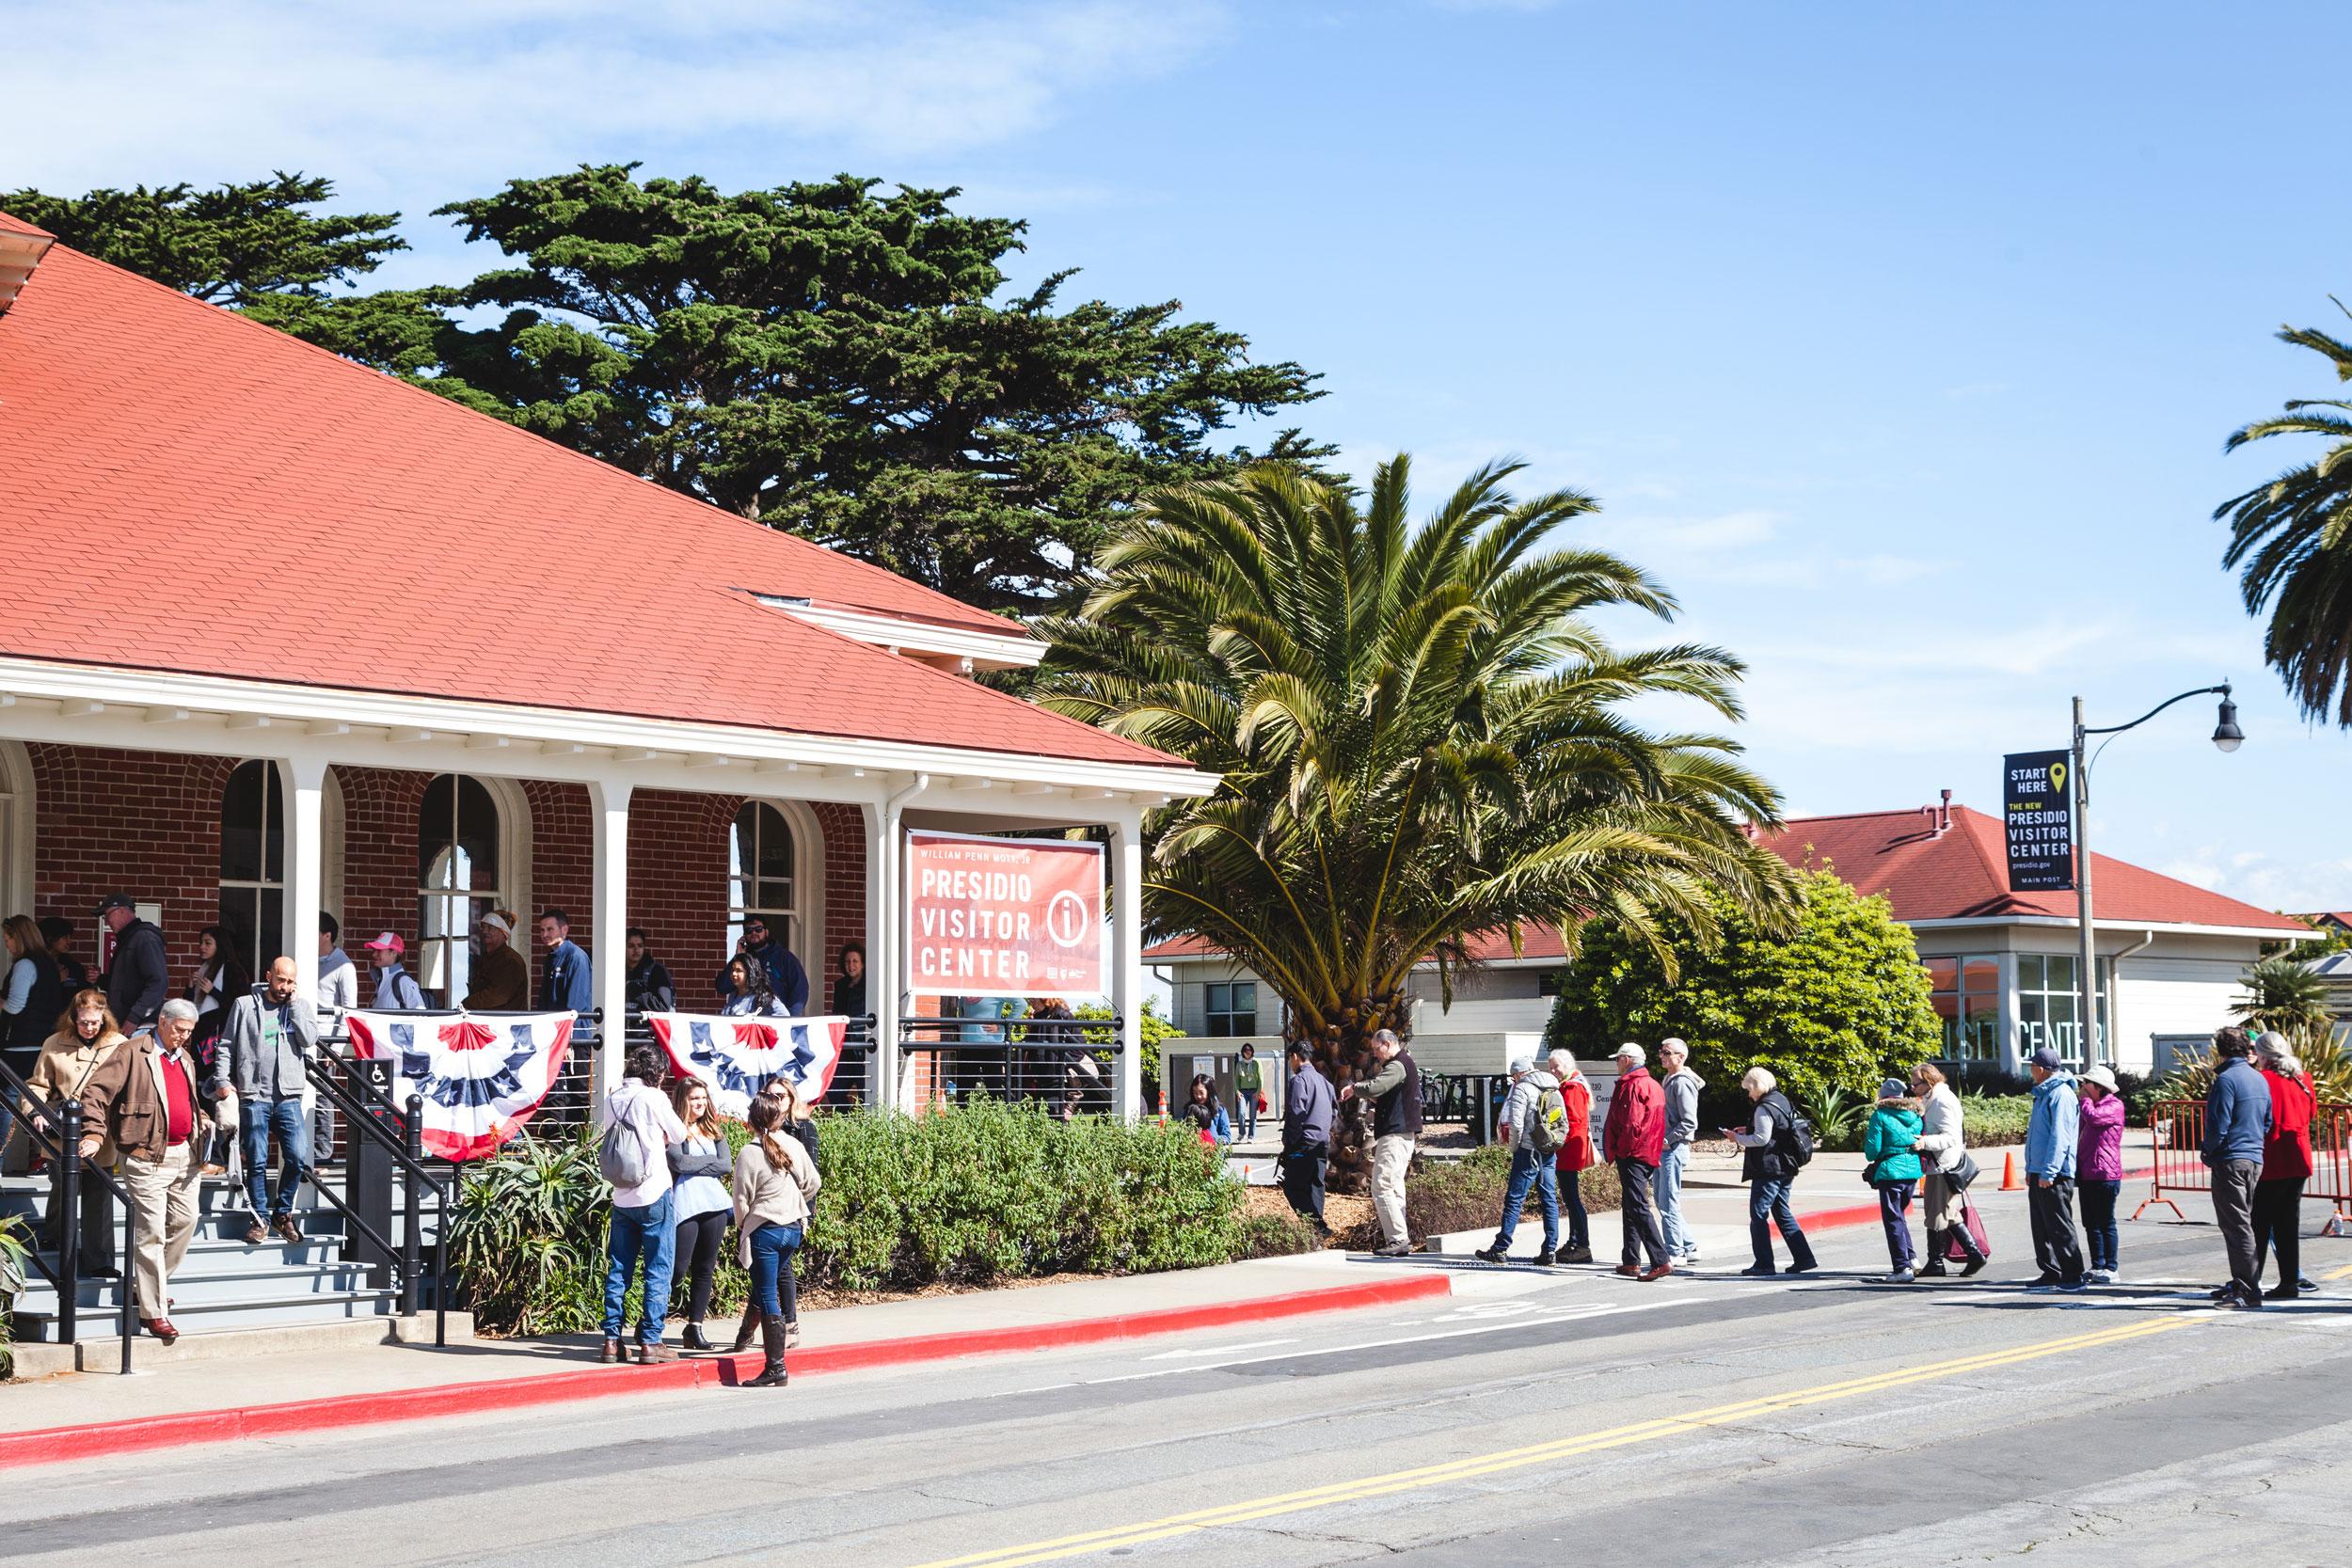 Visitors lined up to enter Presidio Visitor Center